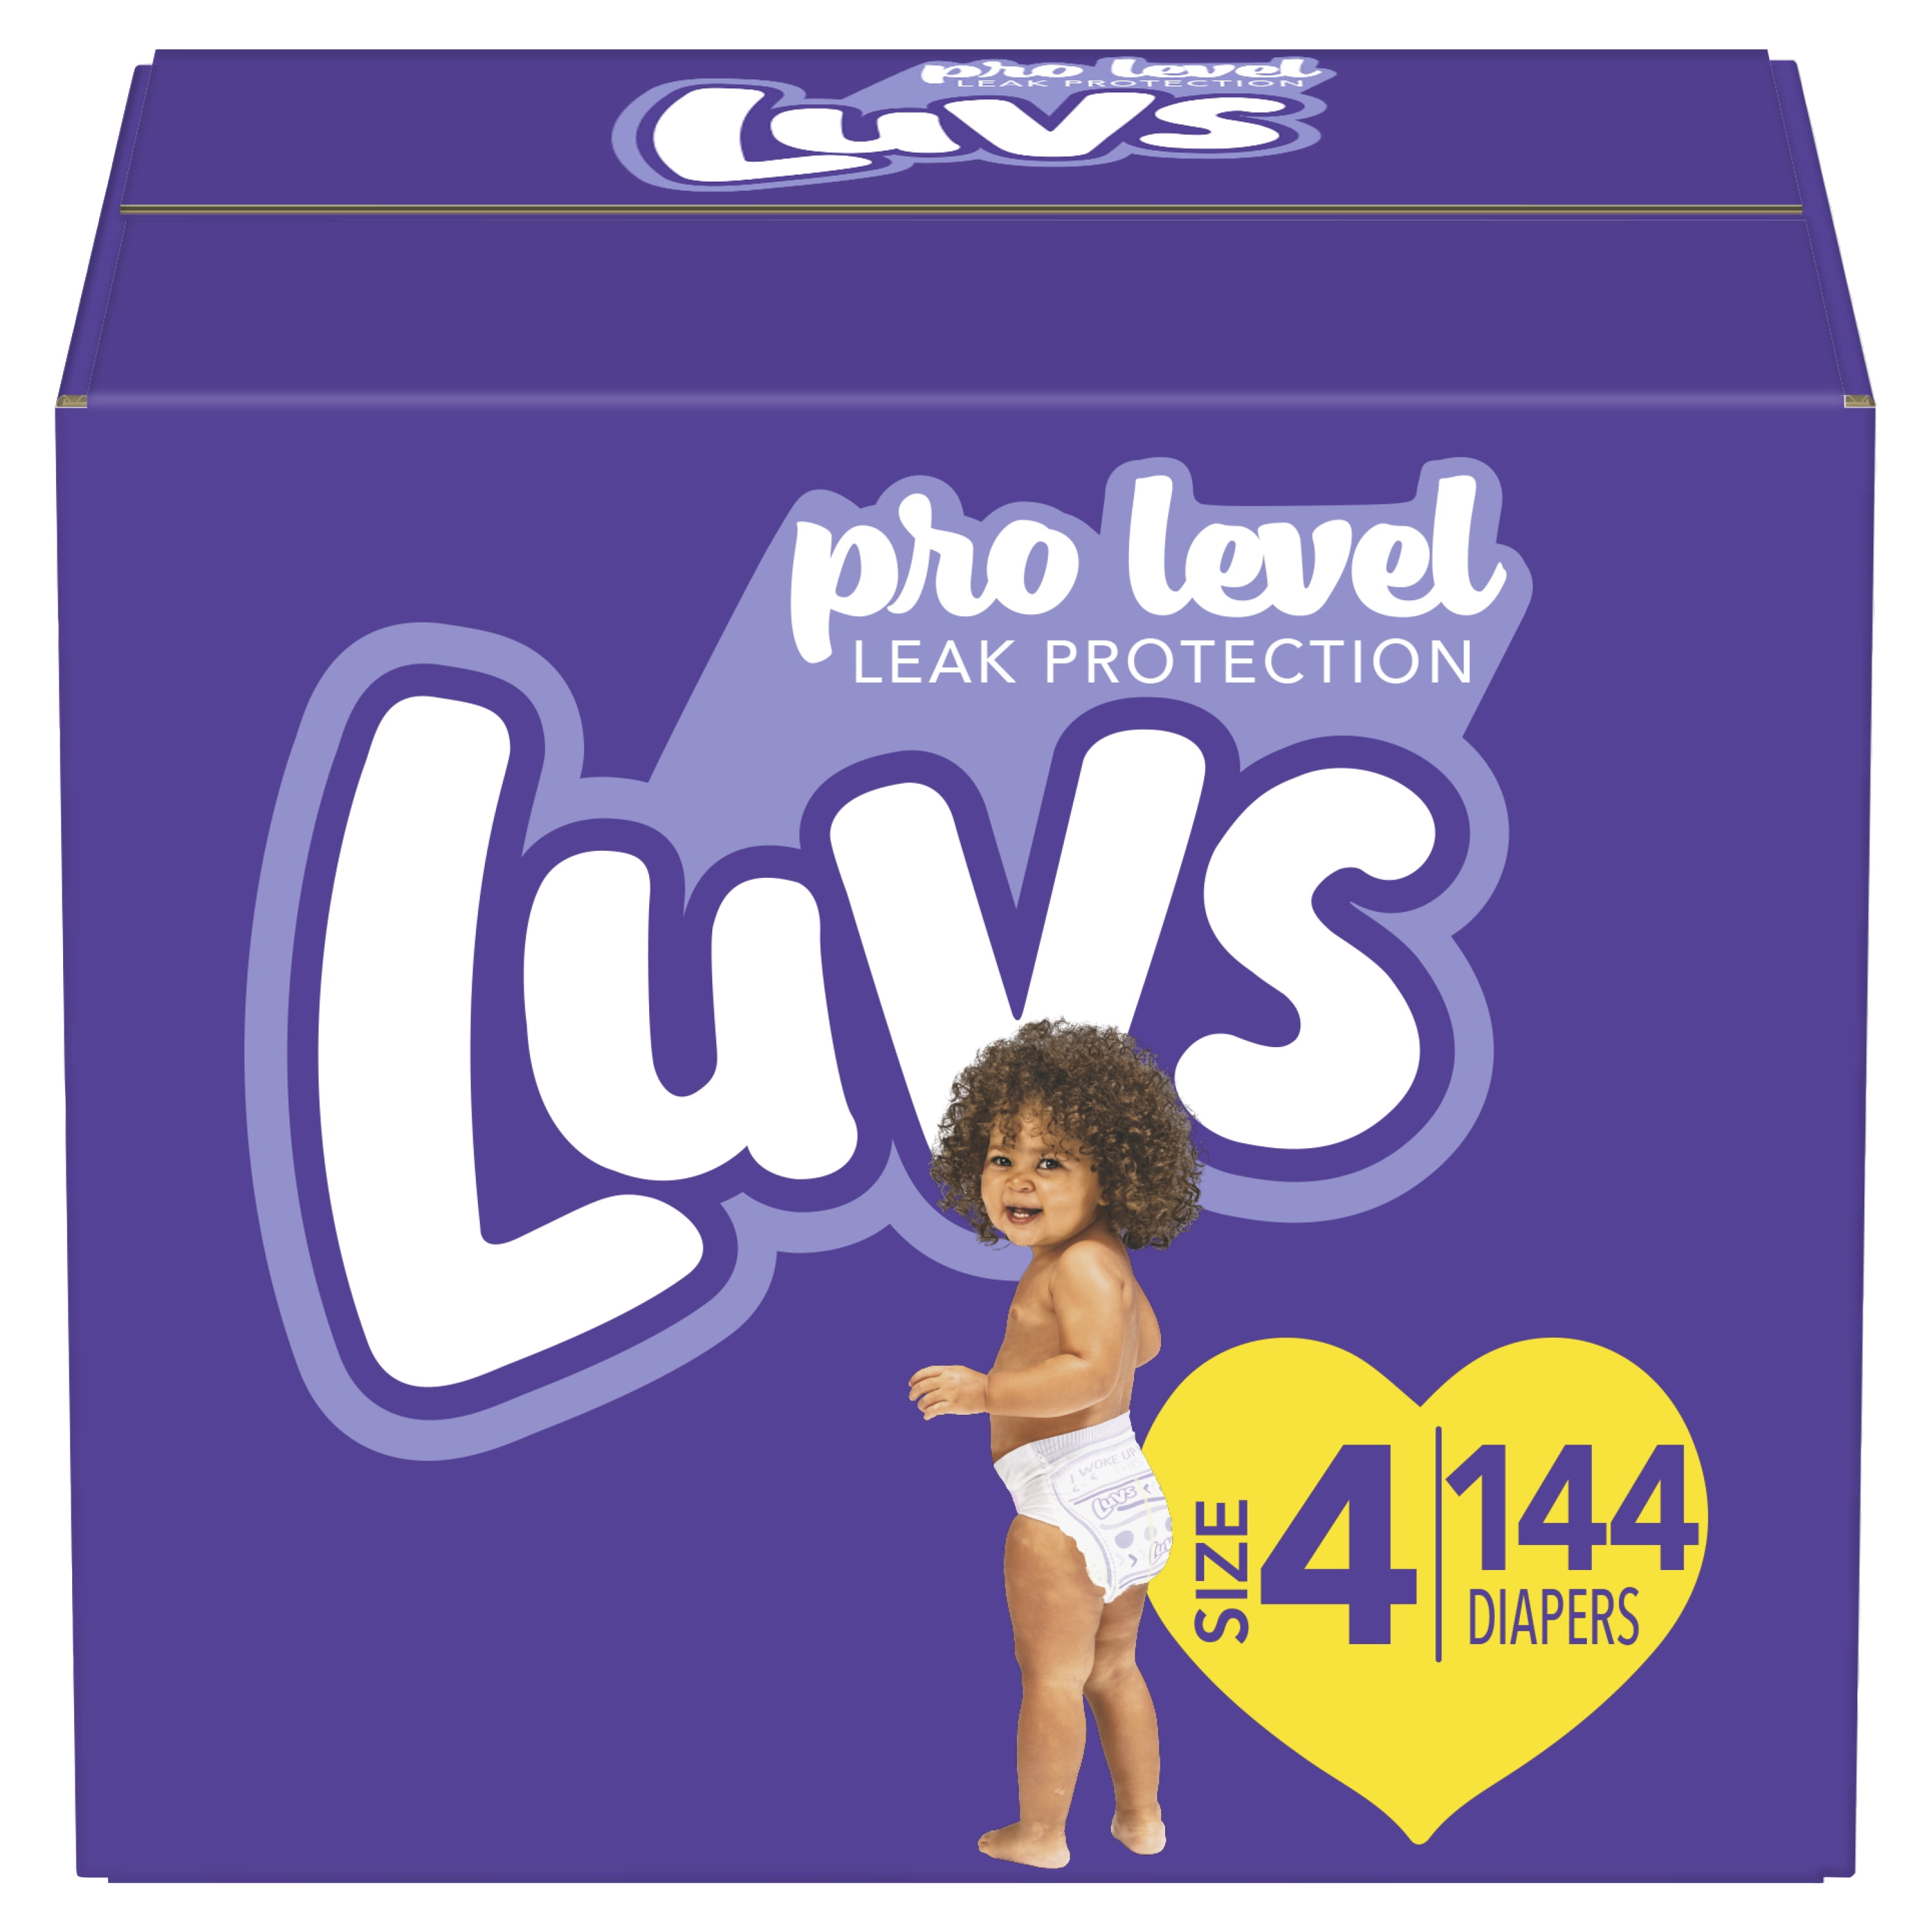 Luvs Pro Level Leak Protection Diapers Size 4 144 Count